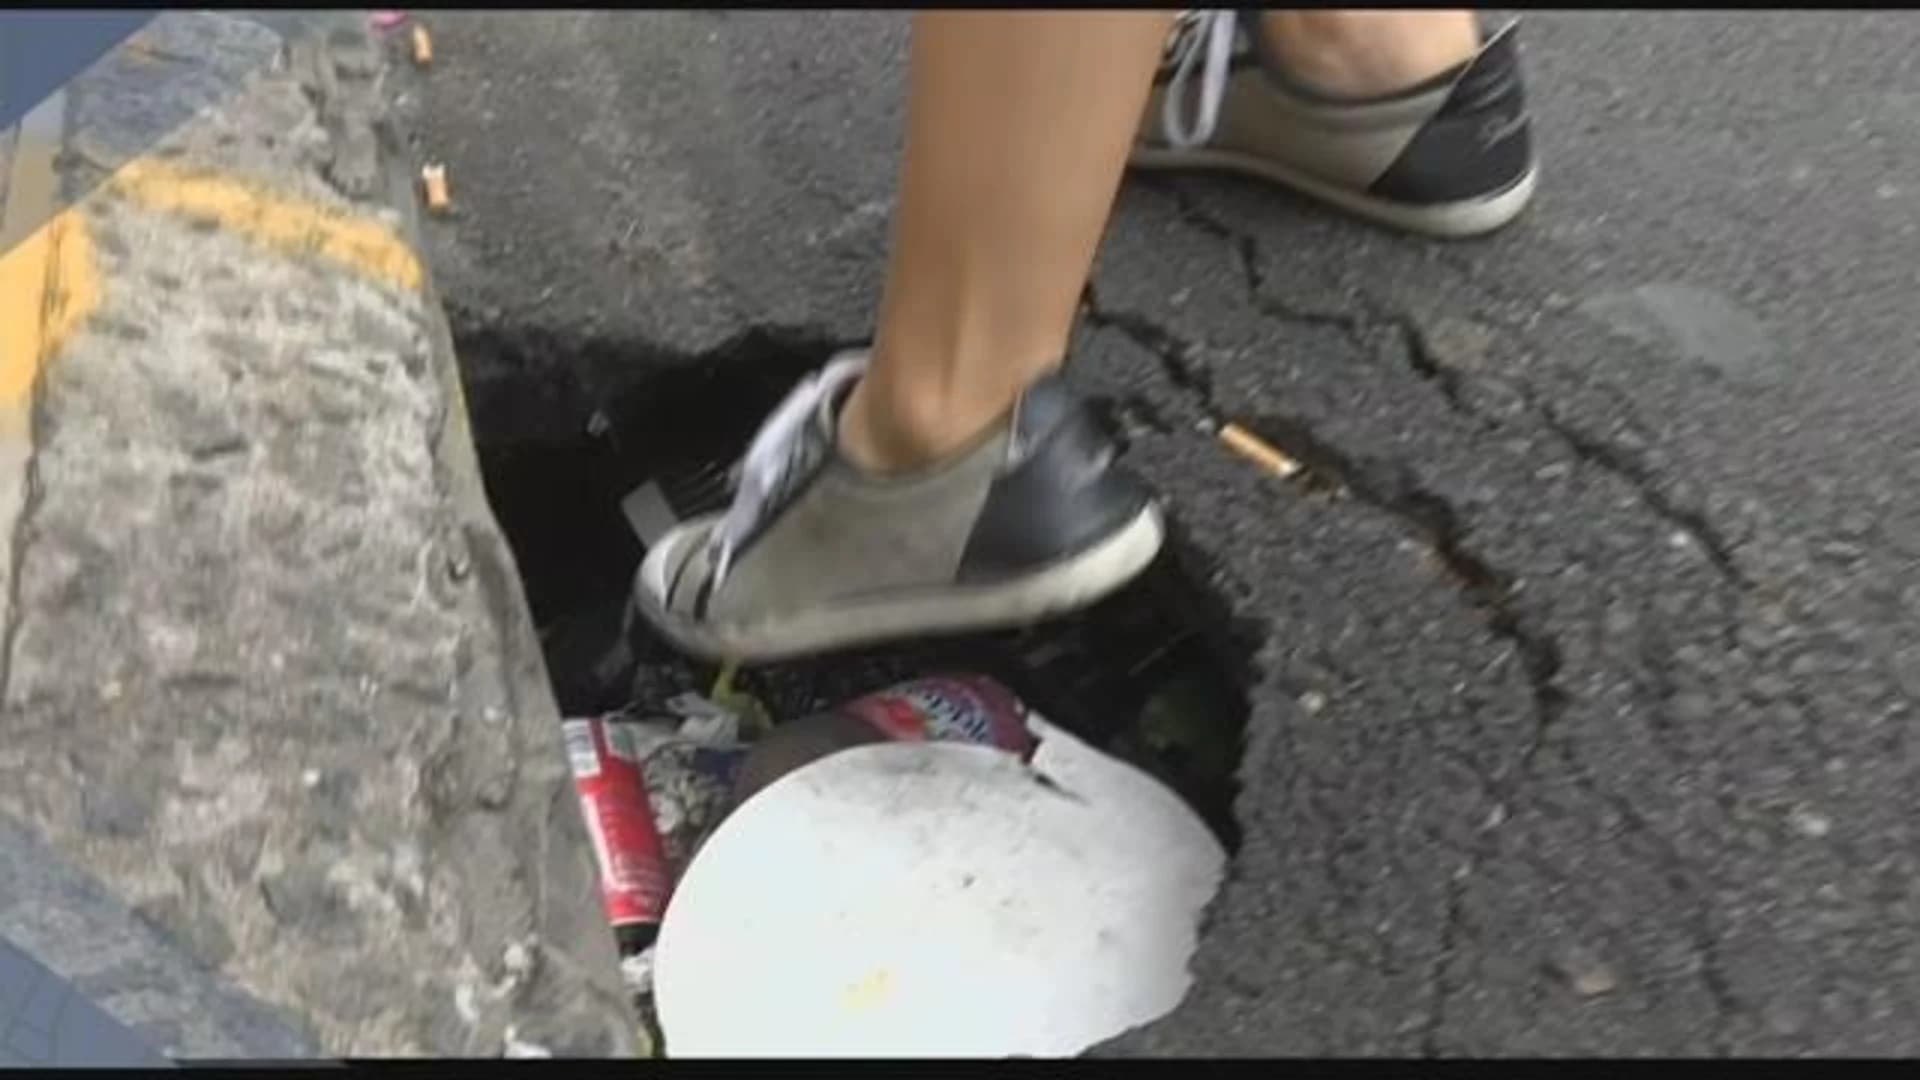 Concourse Village residents concerned about holes in asphalt